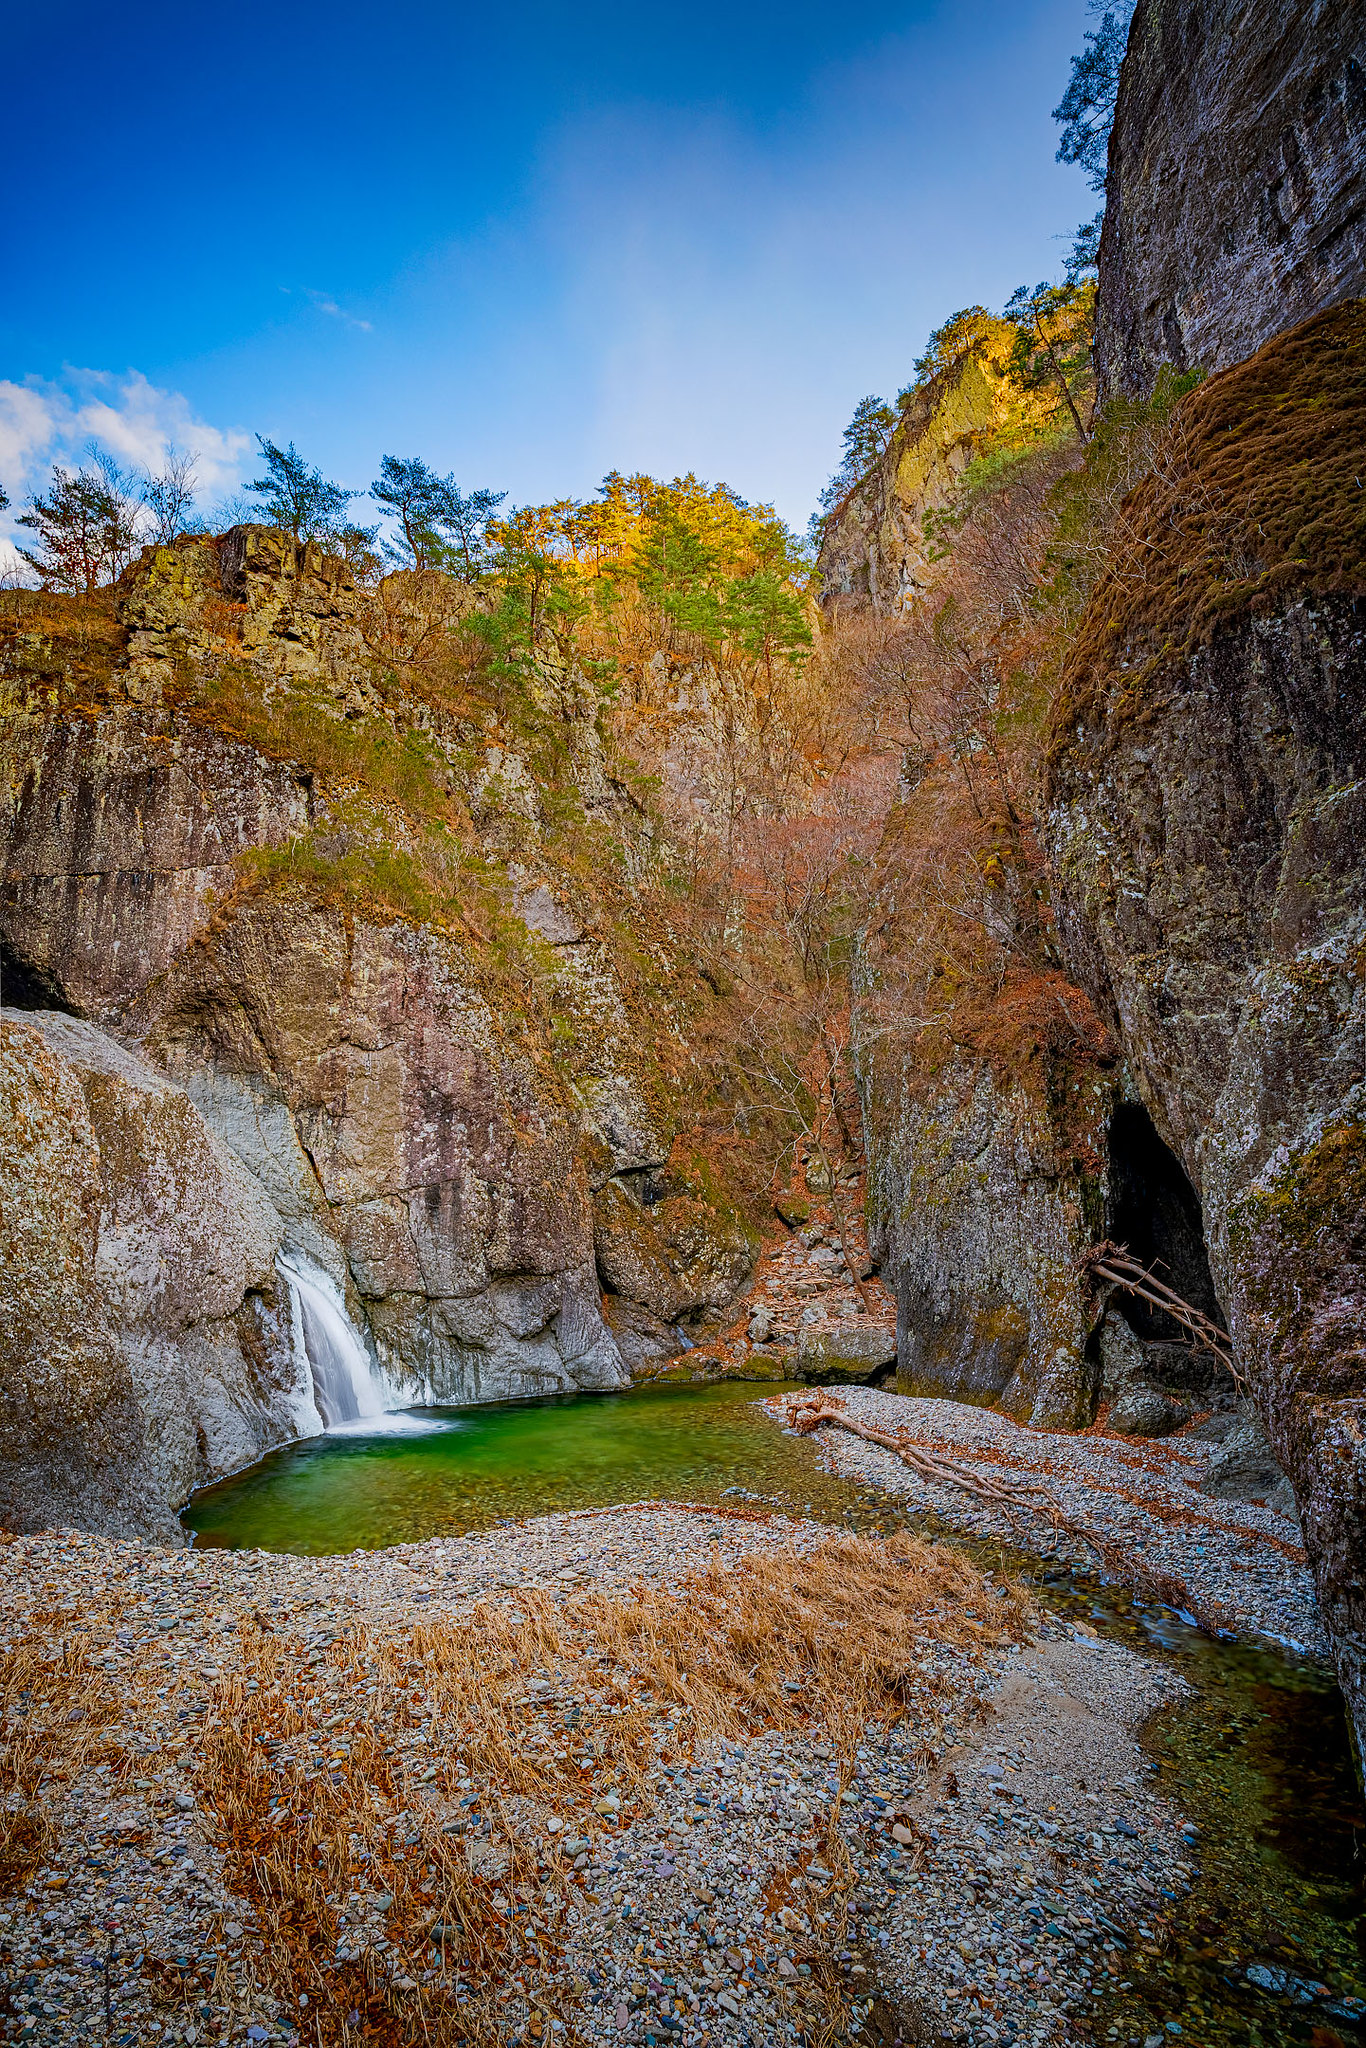 Junwangsan is known for its valley waterfalls